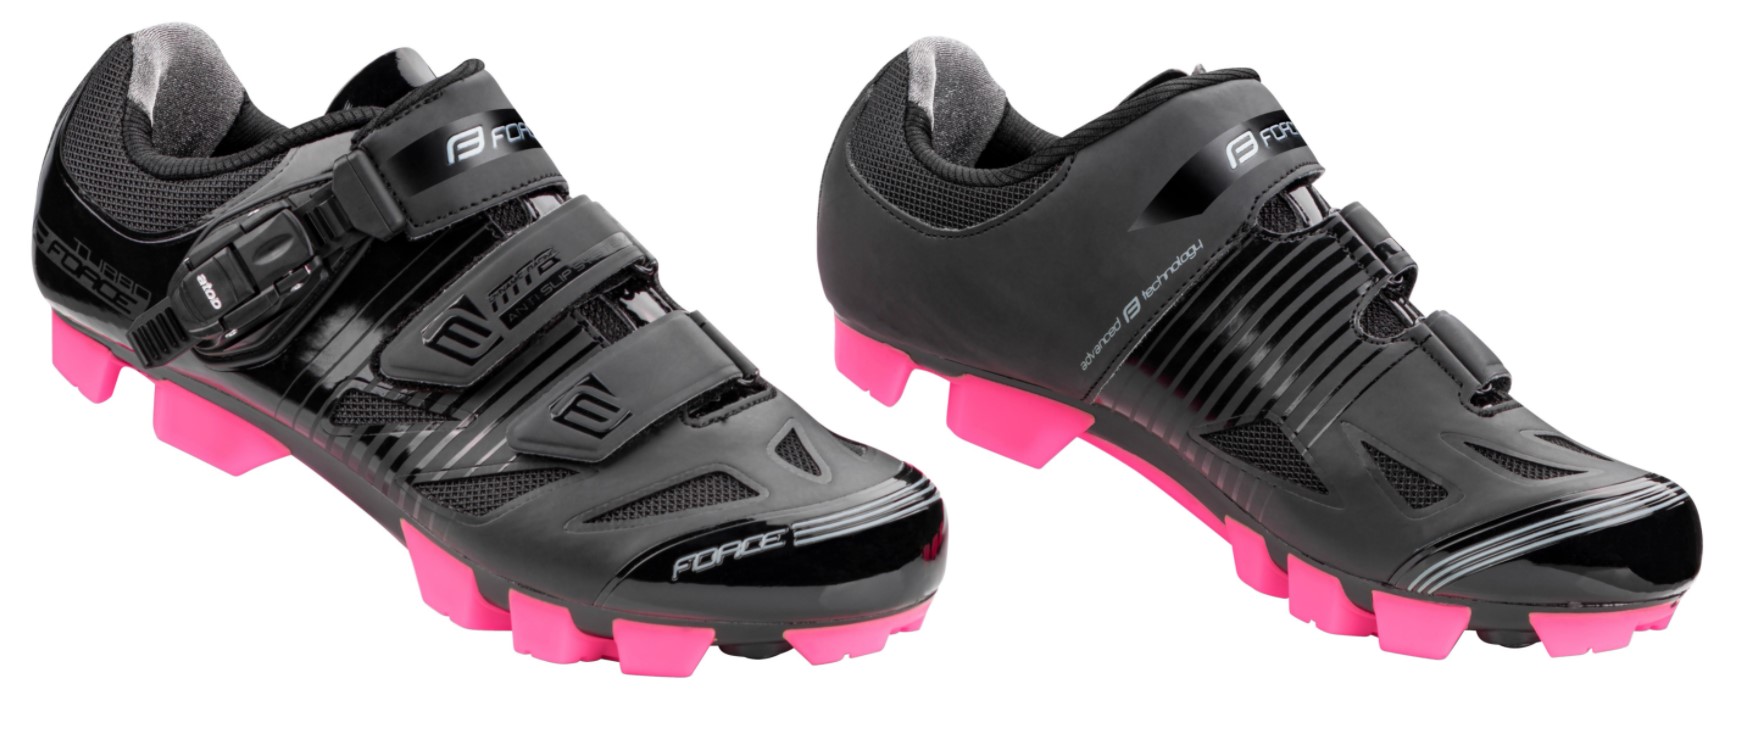 Force Turbo MTB shoes for Women Black / Pink